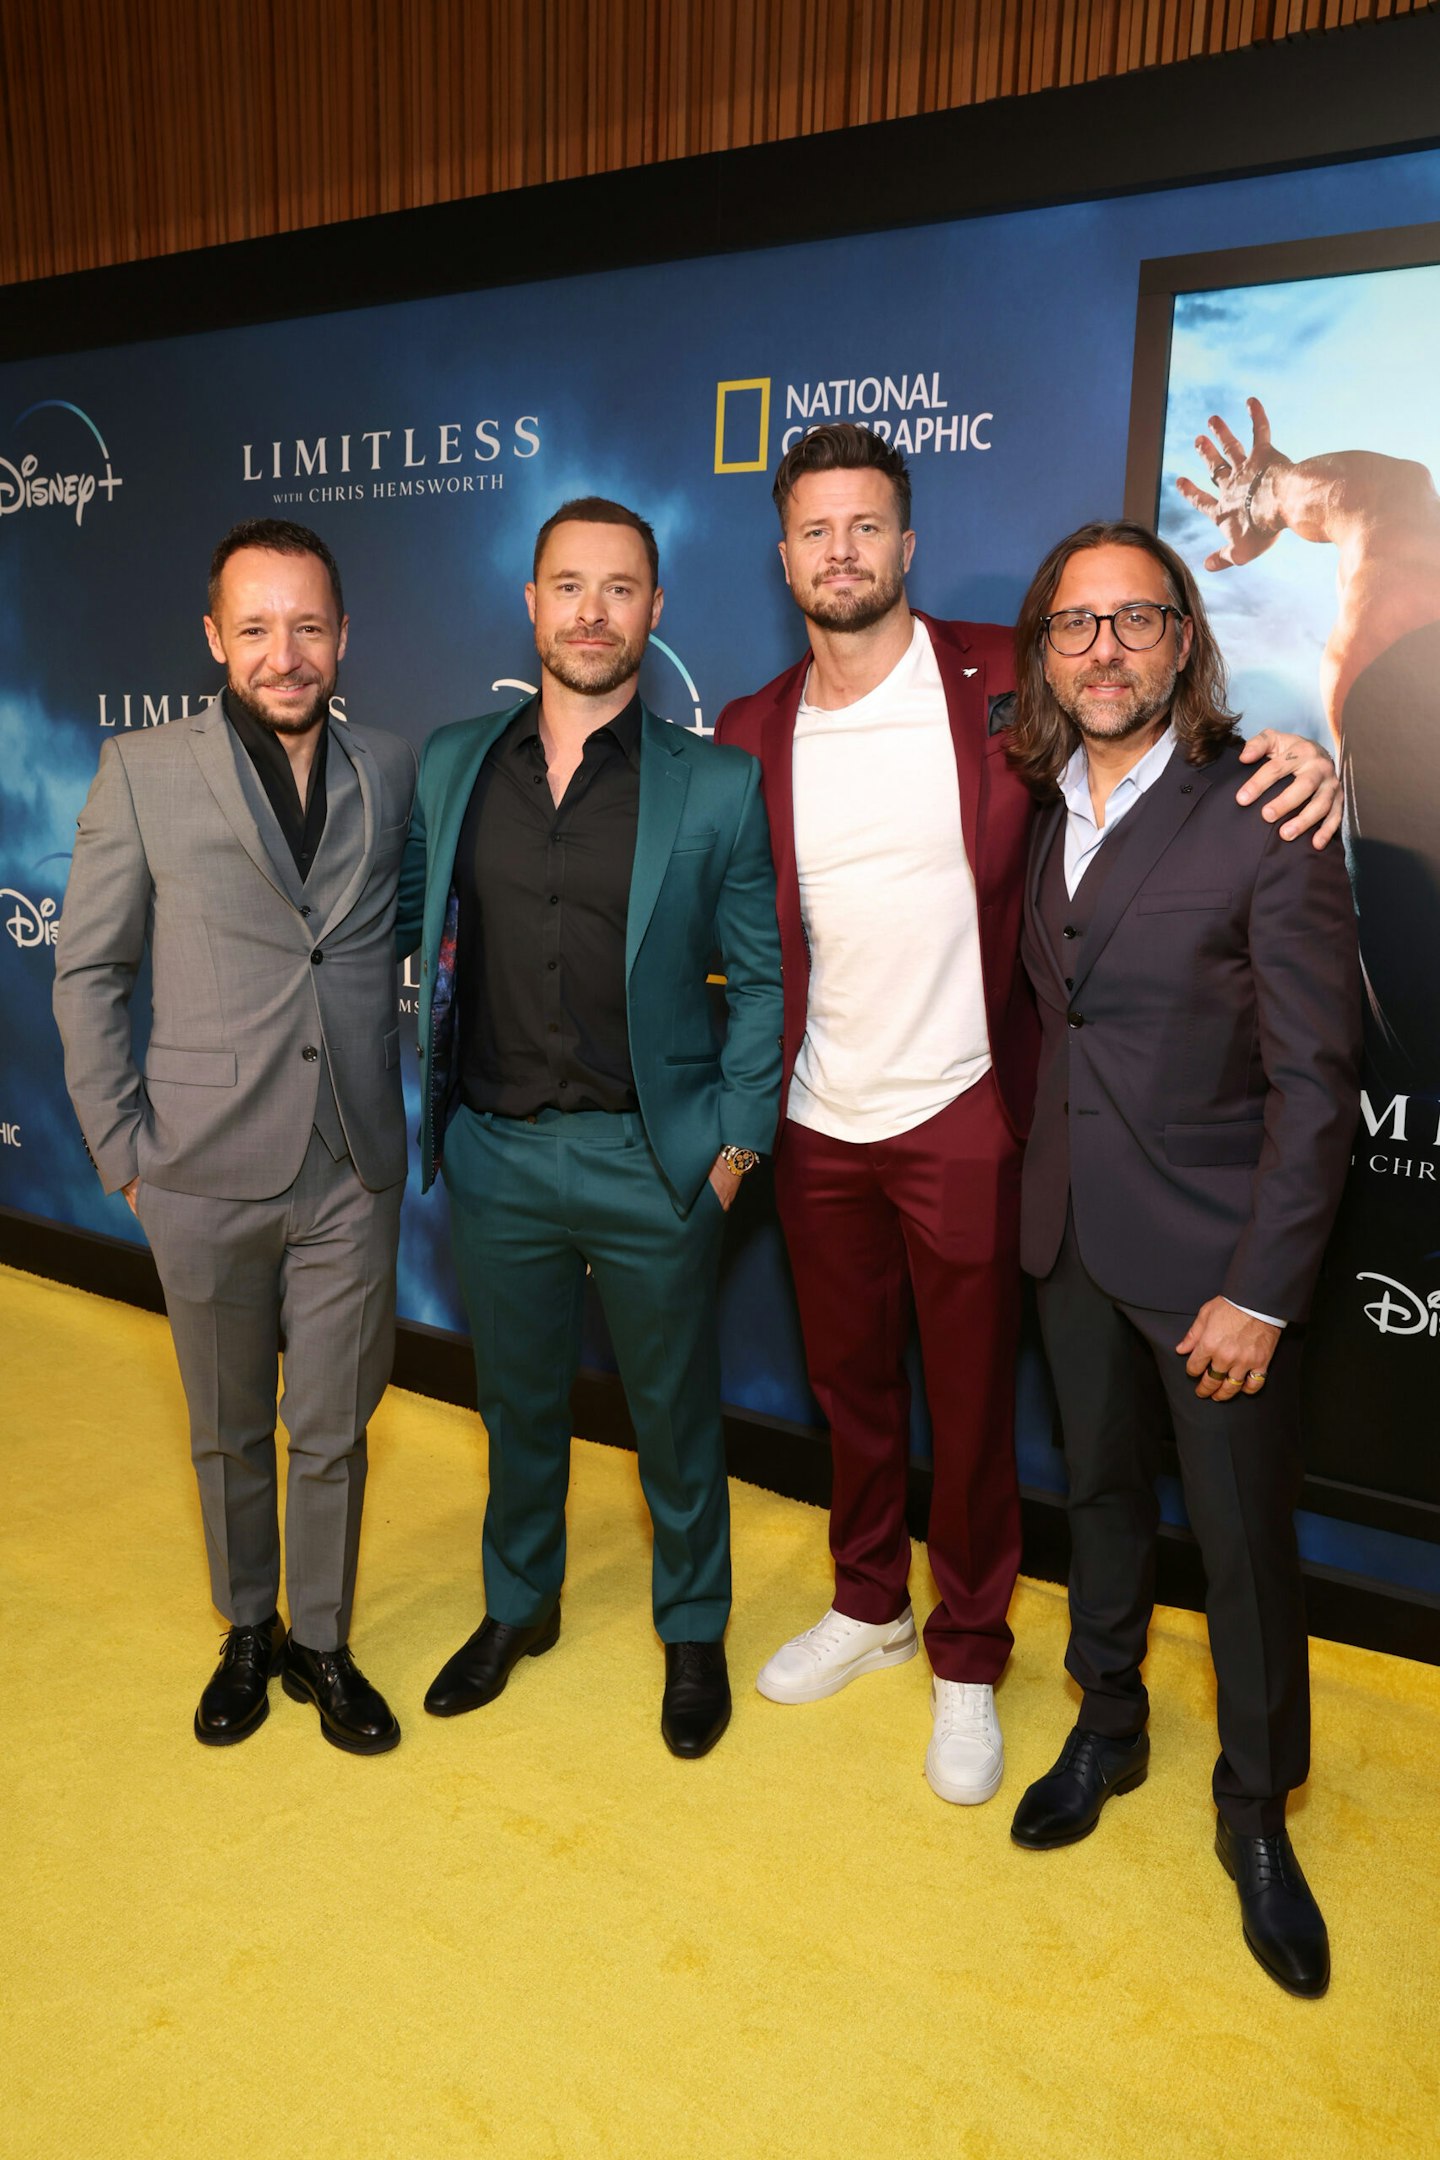 Aaron Grist and Bobby Holland Hanton attend the premiere of the Disney+ original series Limitless with Chris Hemsworth